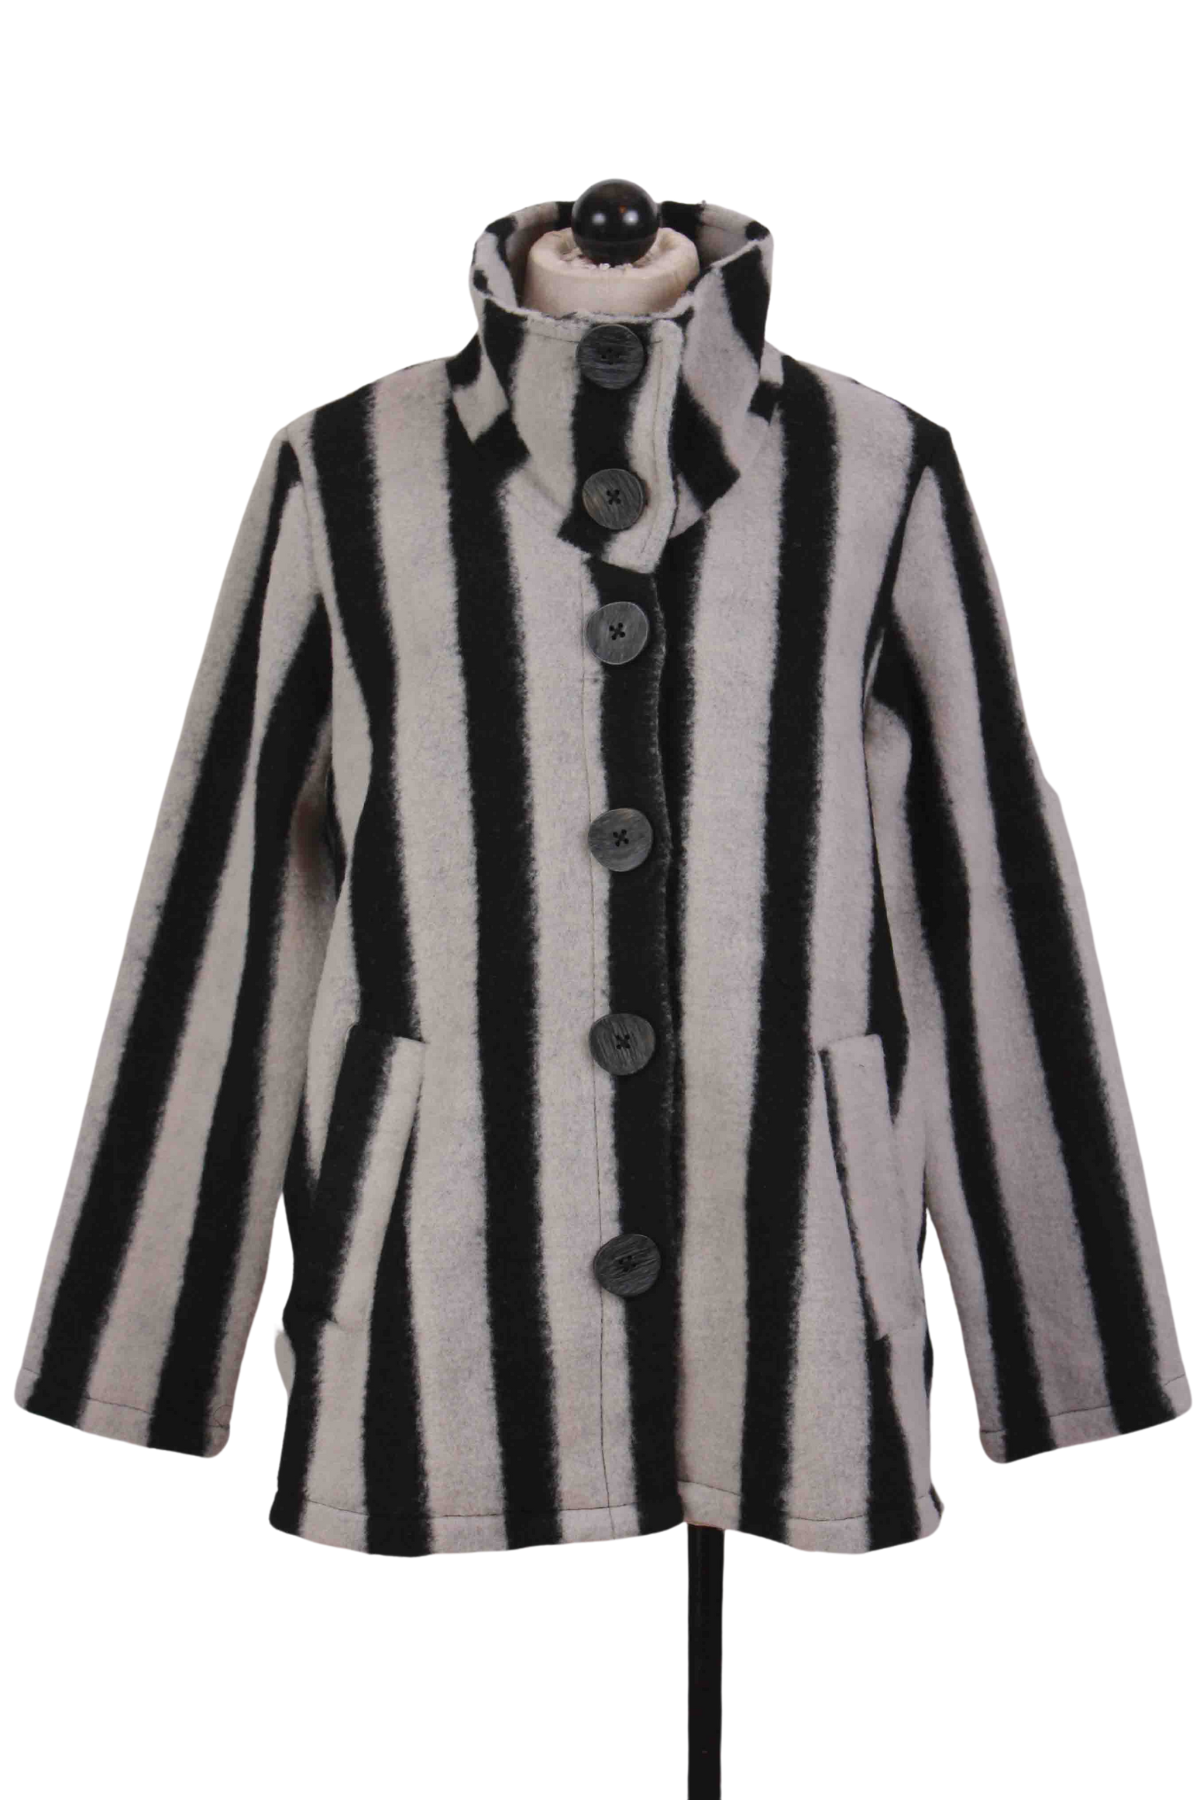 black and sand Earn Stripes Swing Coat by Liv by Habitat